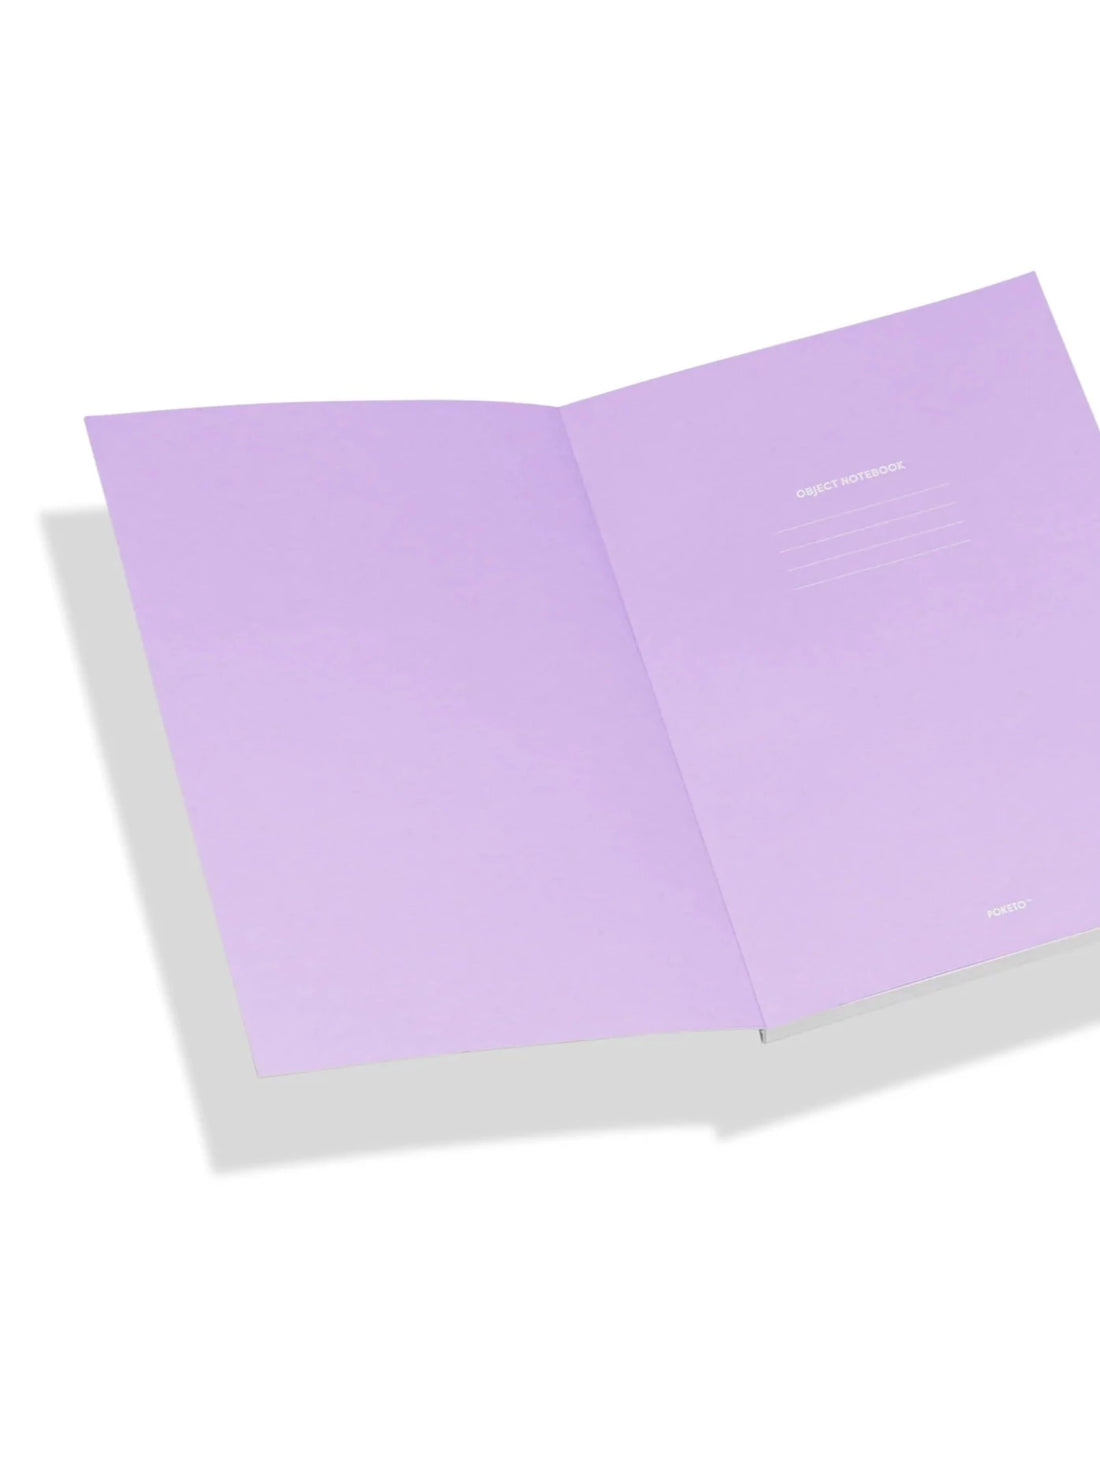 Object Notebook - Lavender